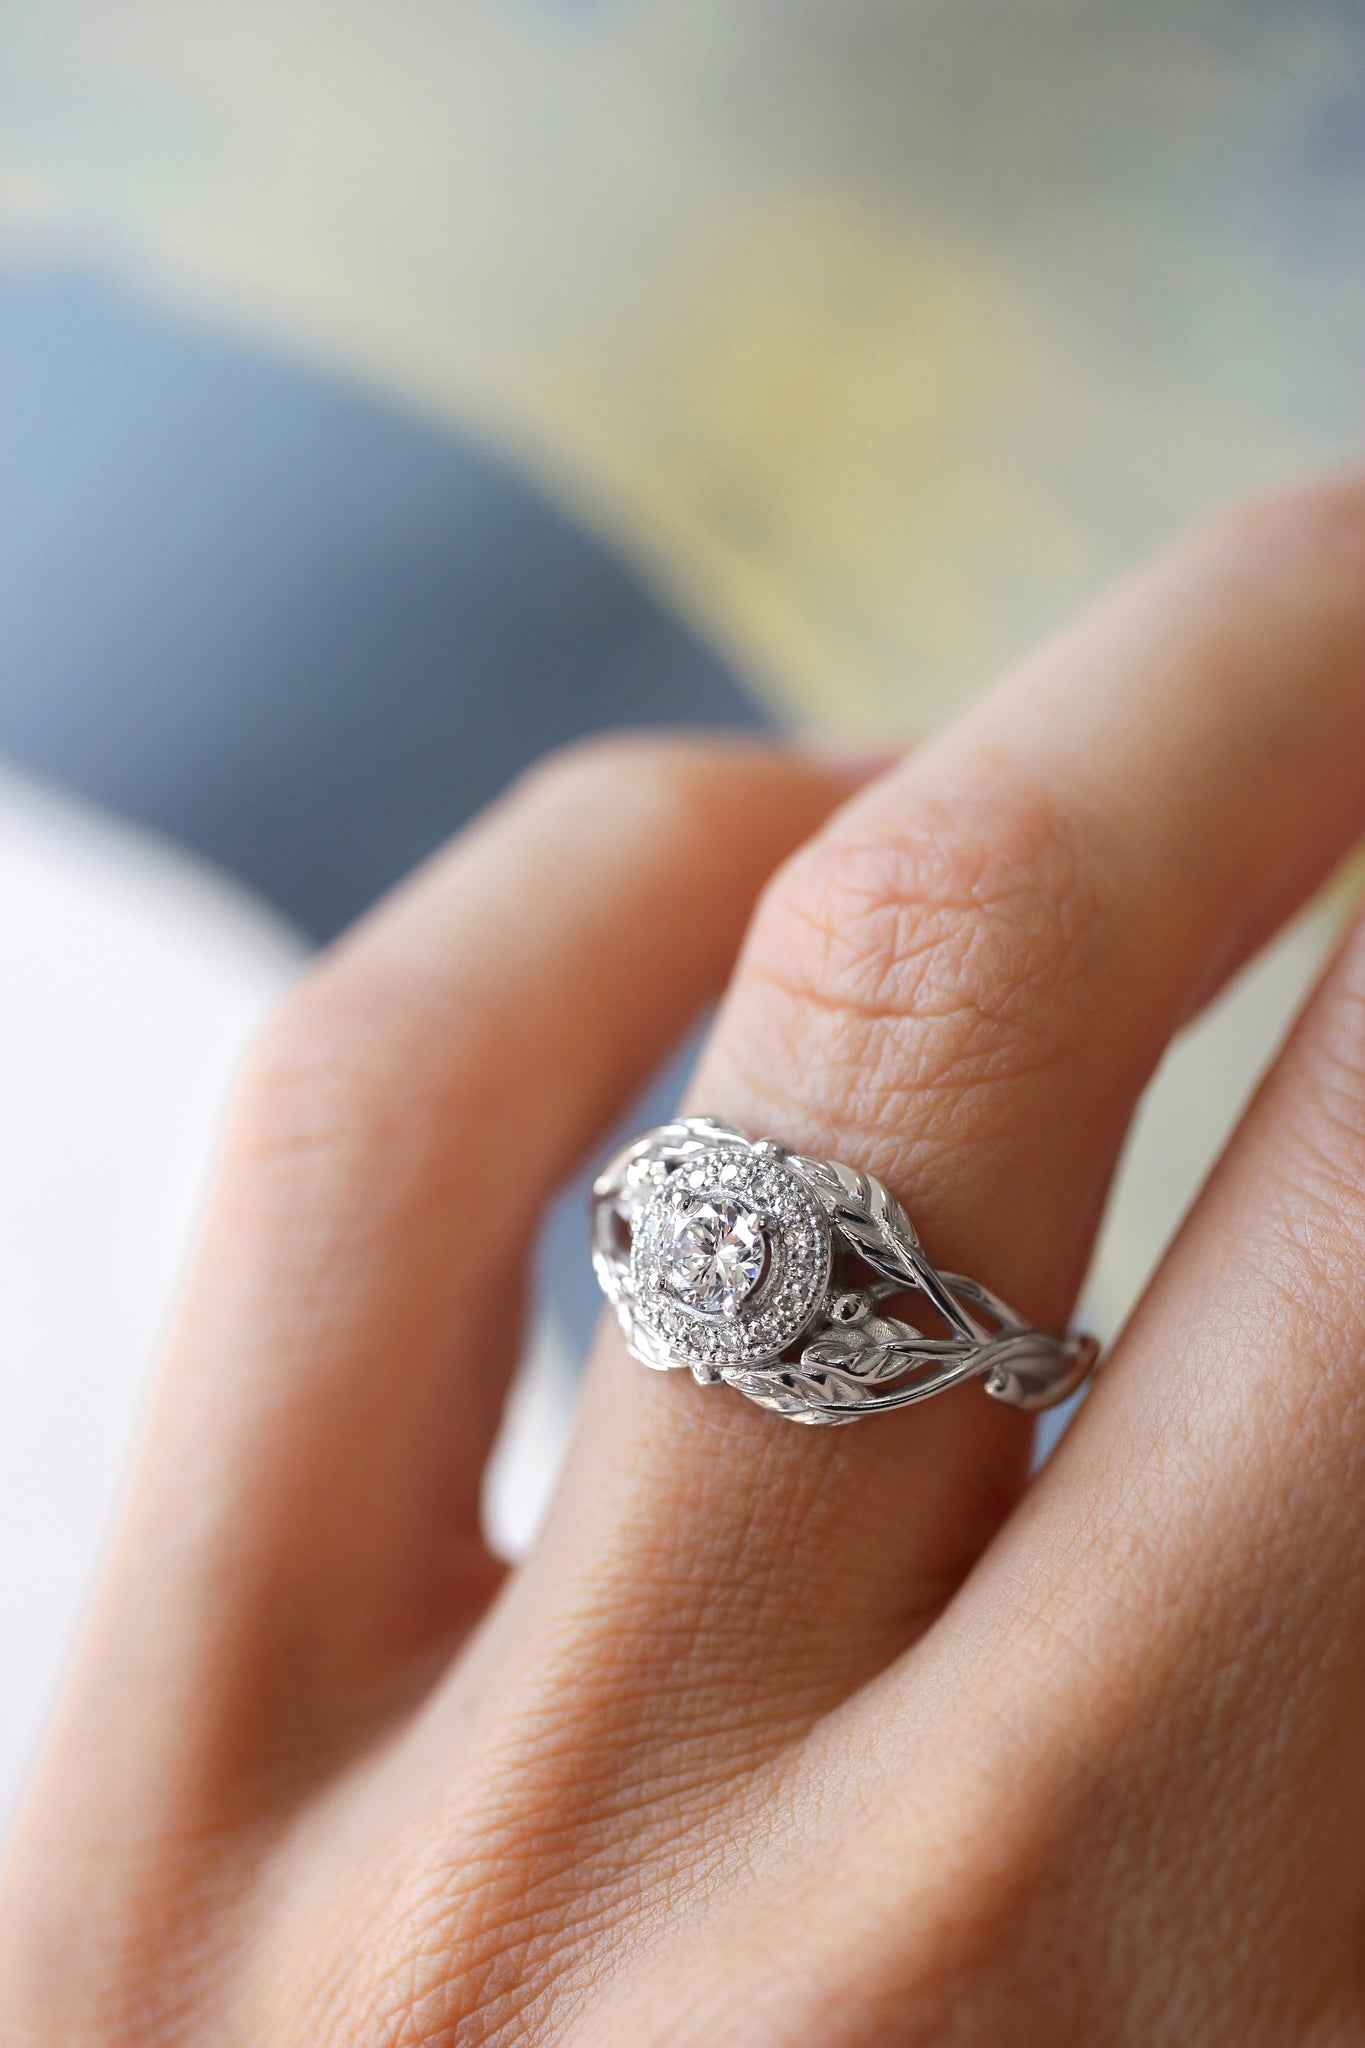 Leaf engagement ring with natural diamonds / Tilia halo - Eden Garden Jewelry™